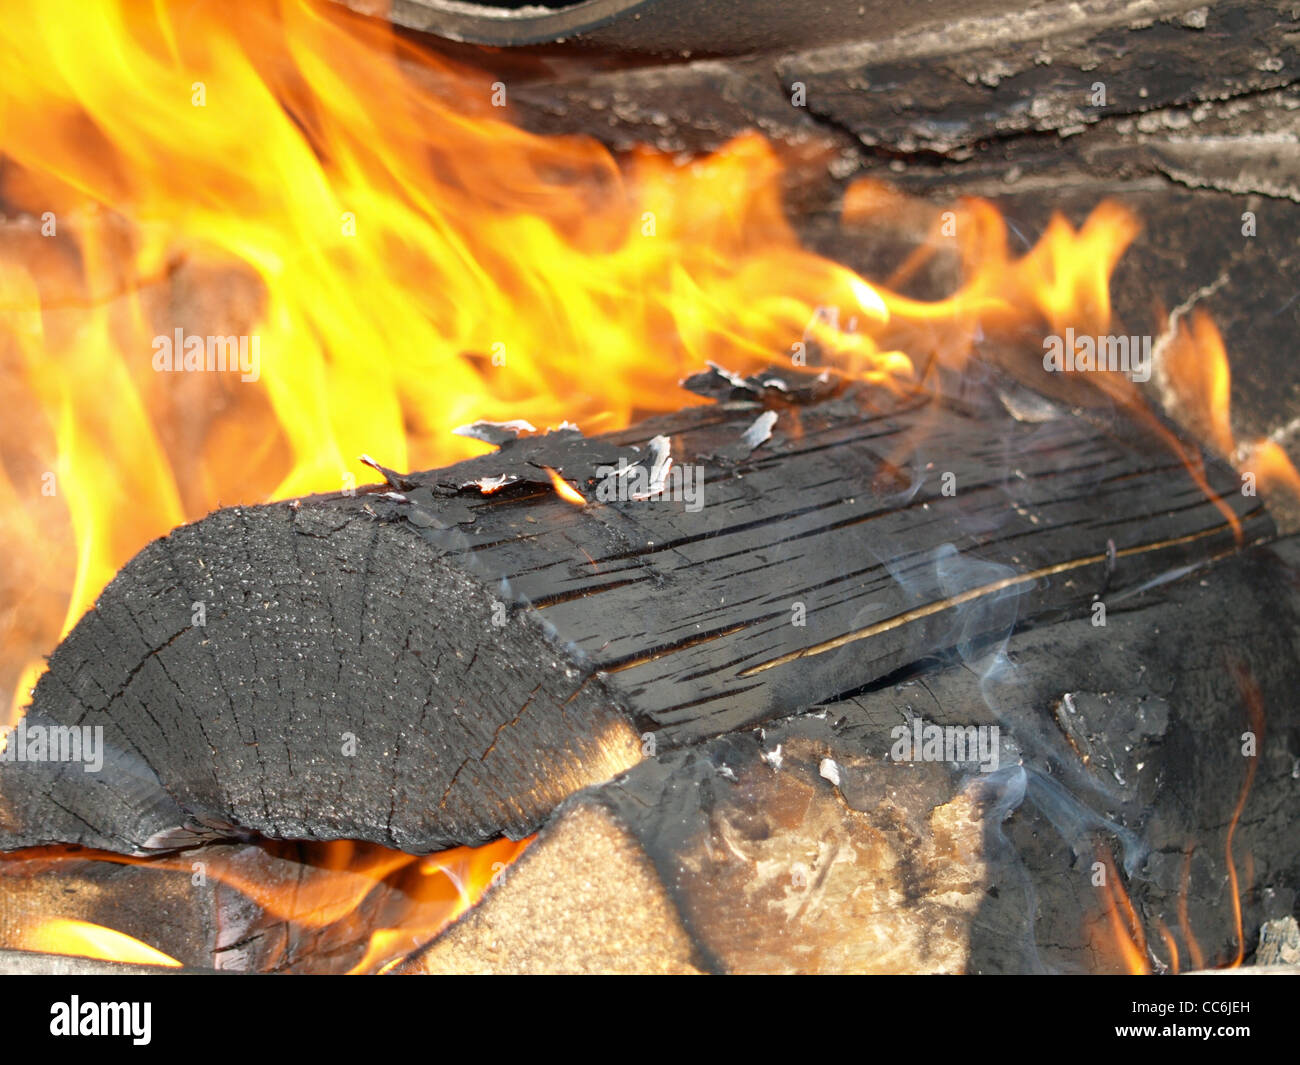 fire place, ember / Feuerstelle, Glut Stock Photo